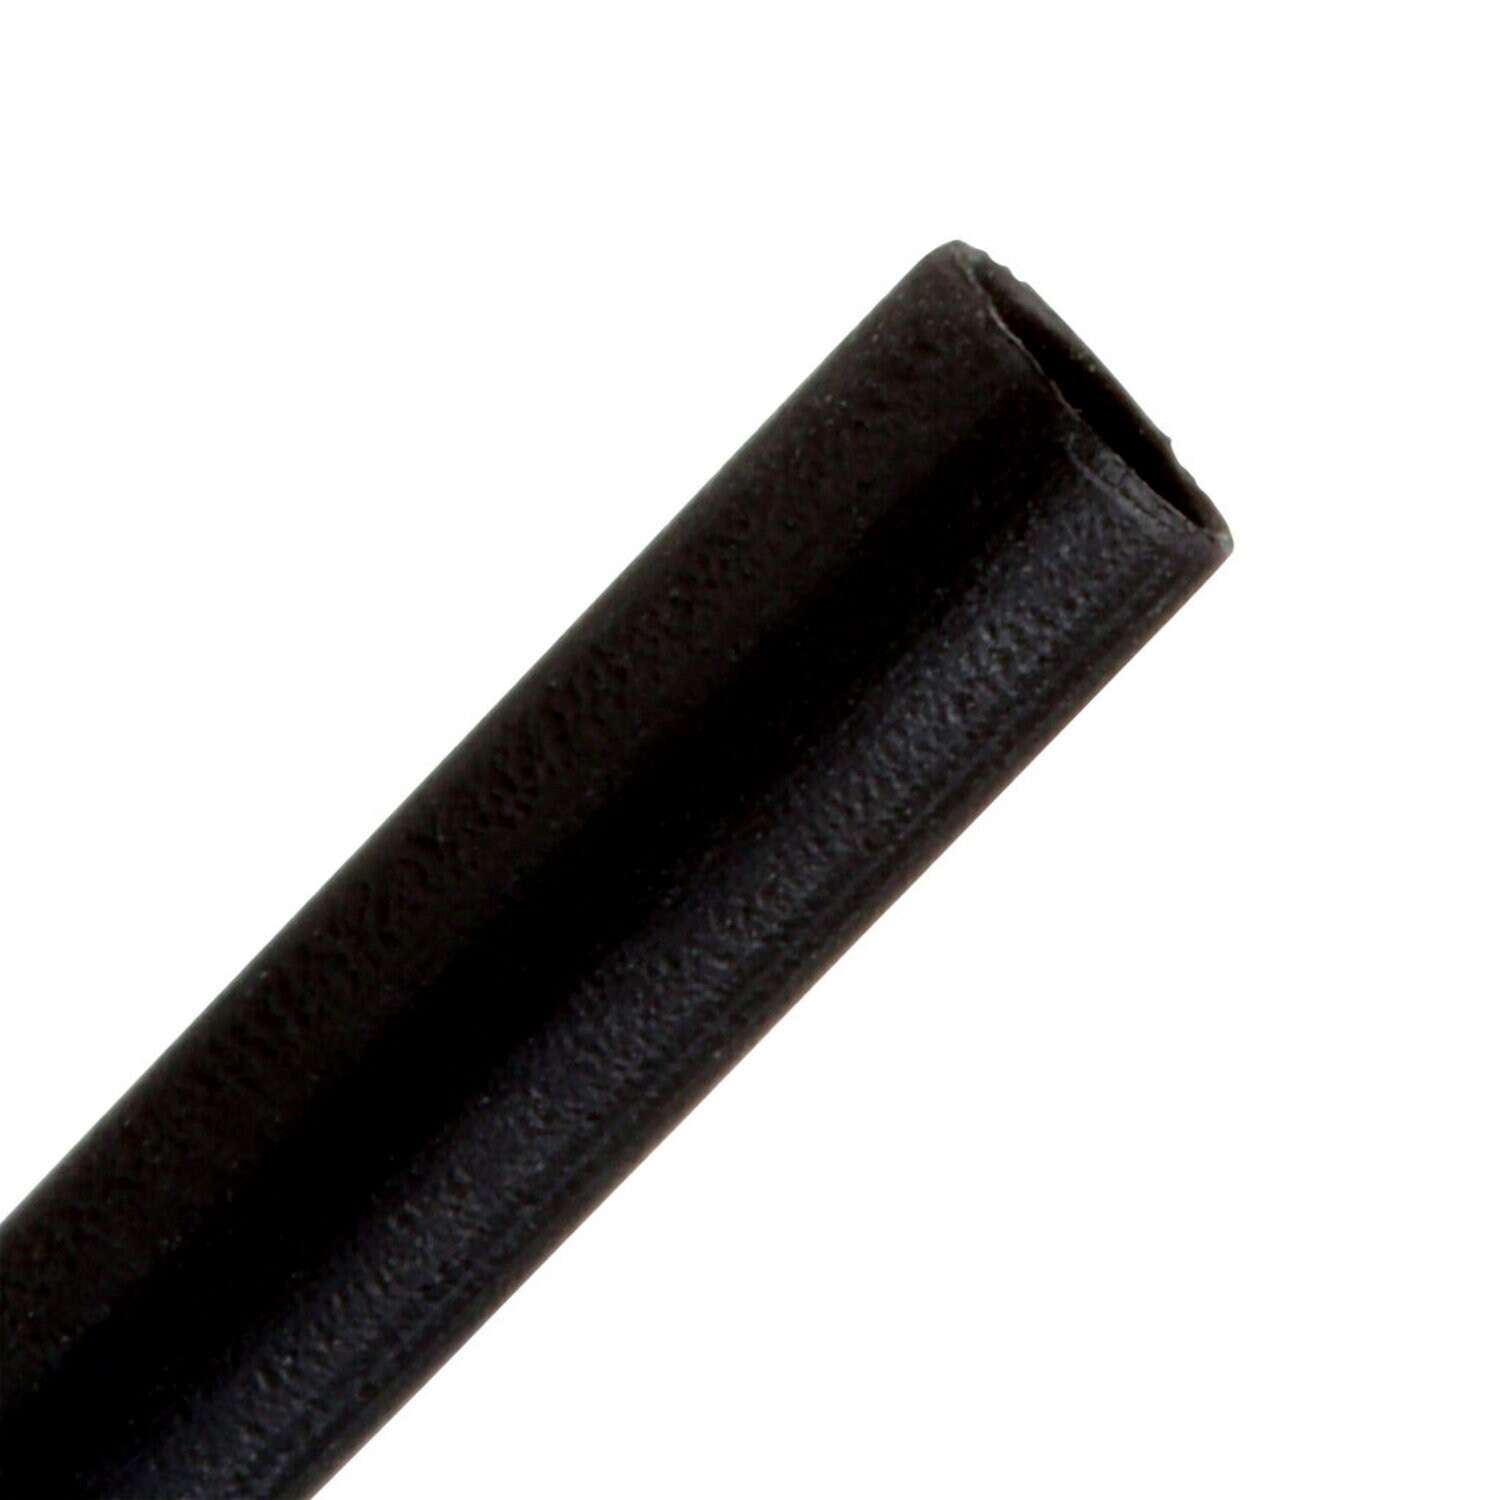 7100032539 - 3M Heat Shrink Thin-Wall Tubing FP-301-3/32-48"-Black-250 Pcs, 48 in
Length sticks, 250 pieces/case